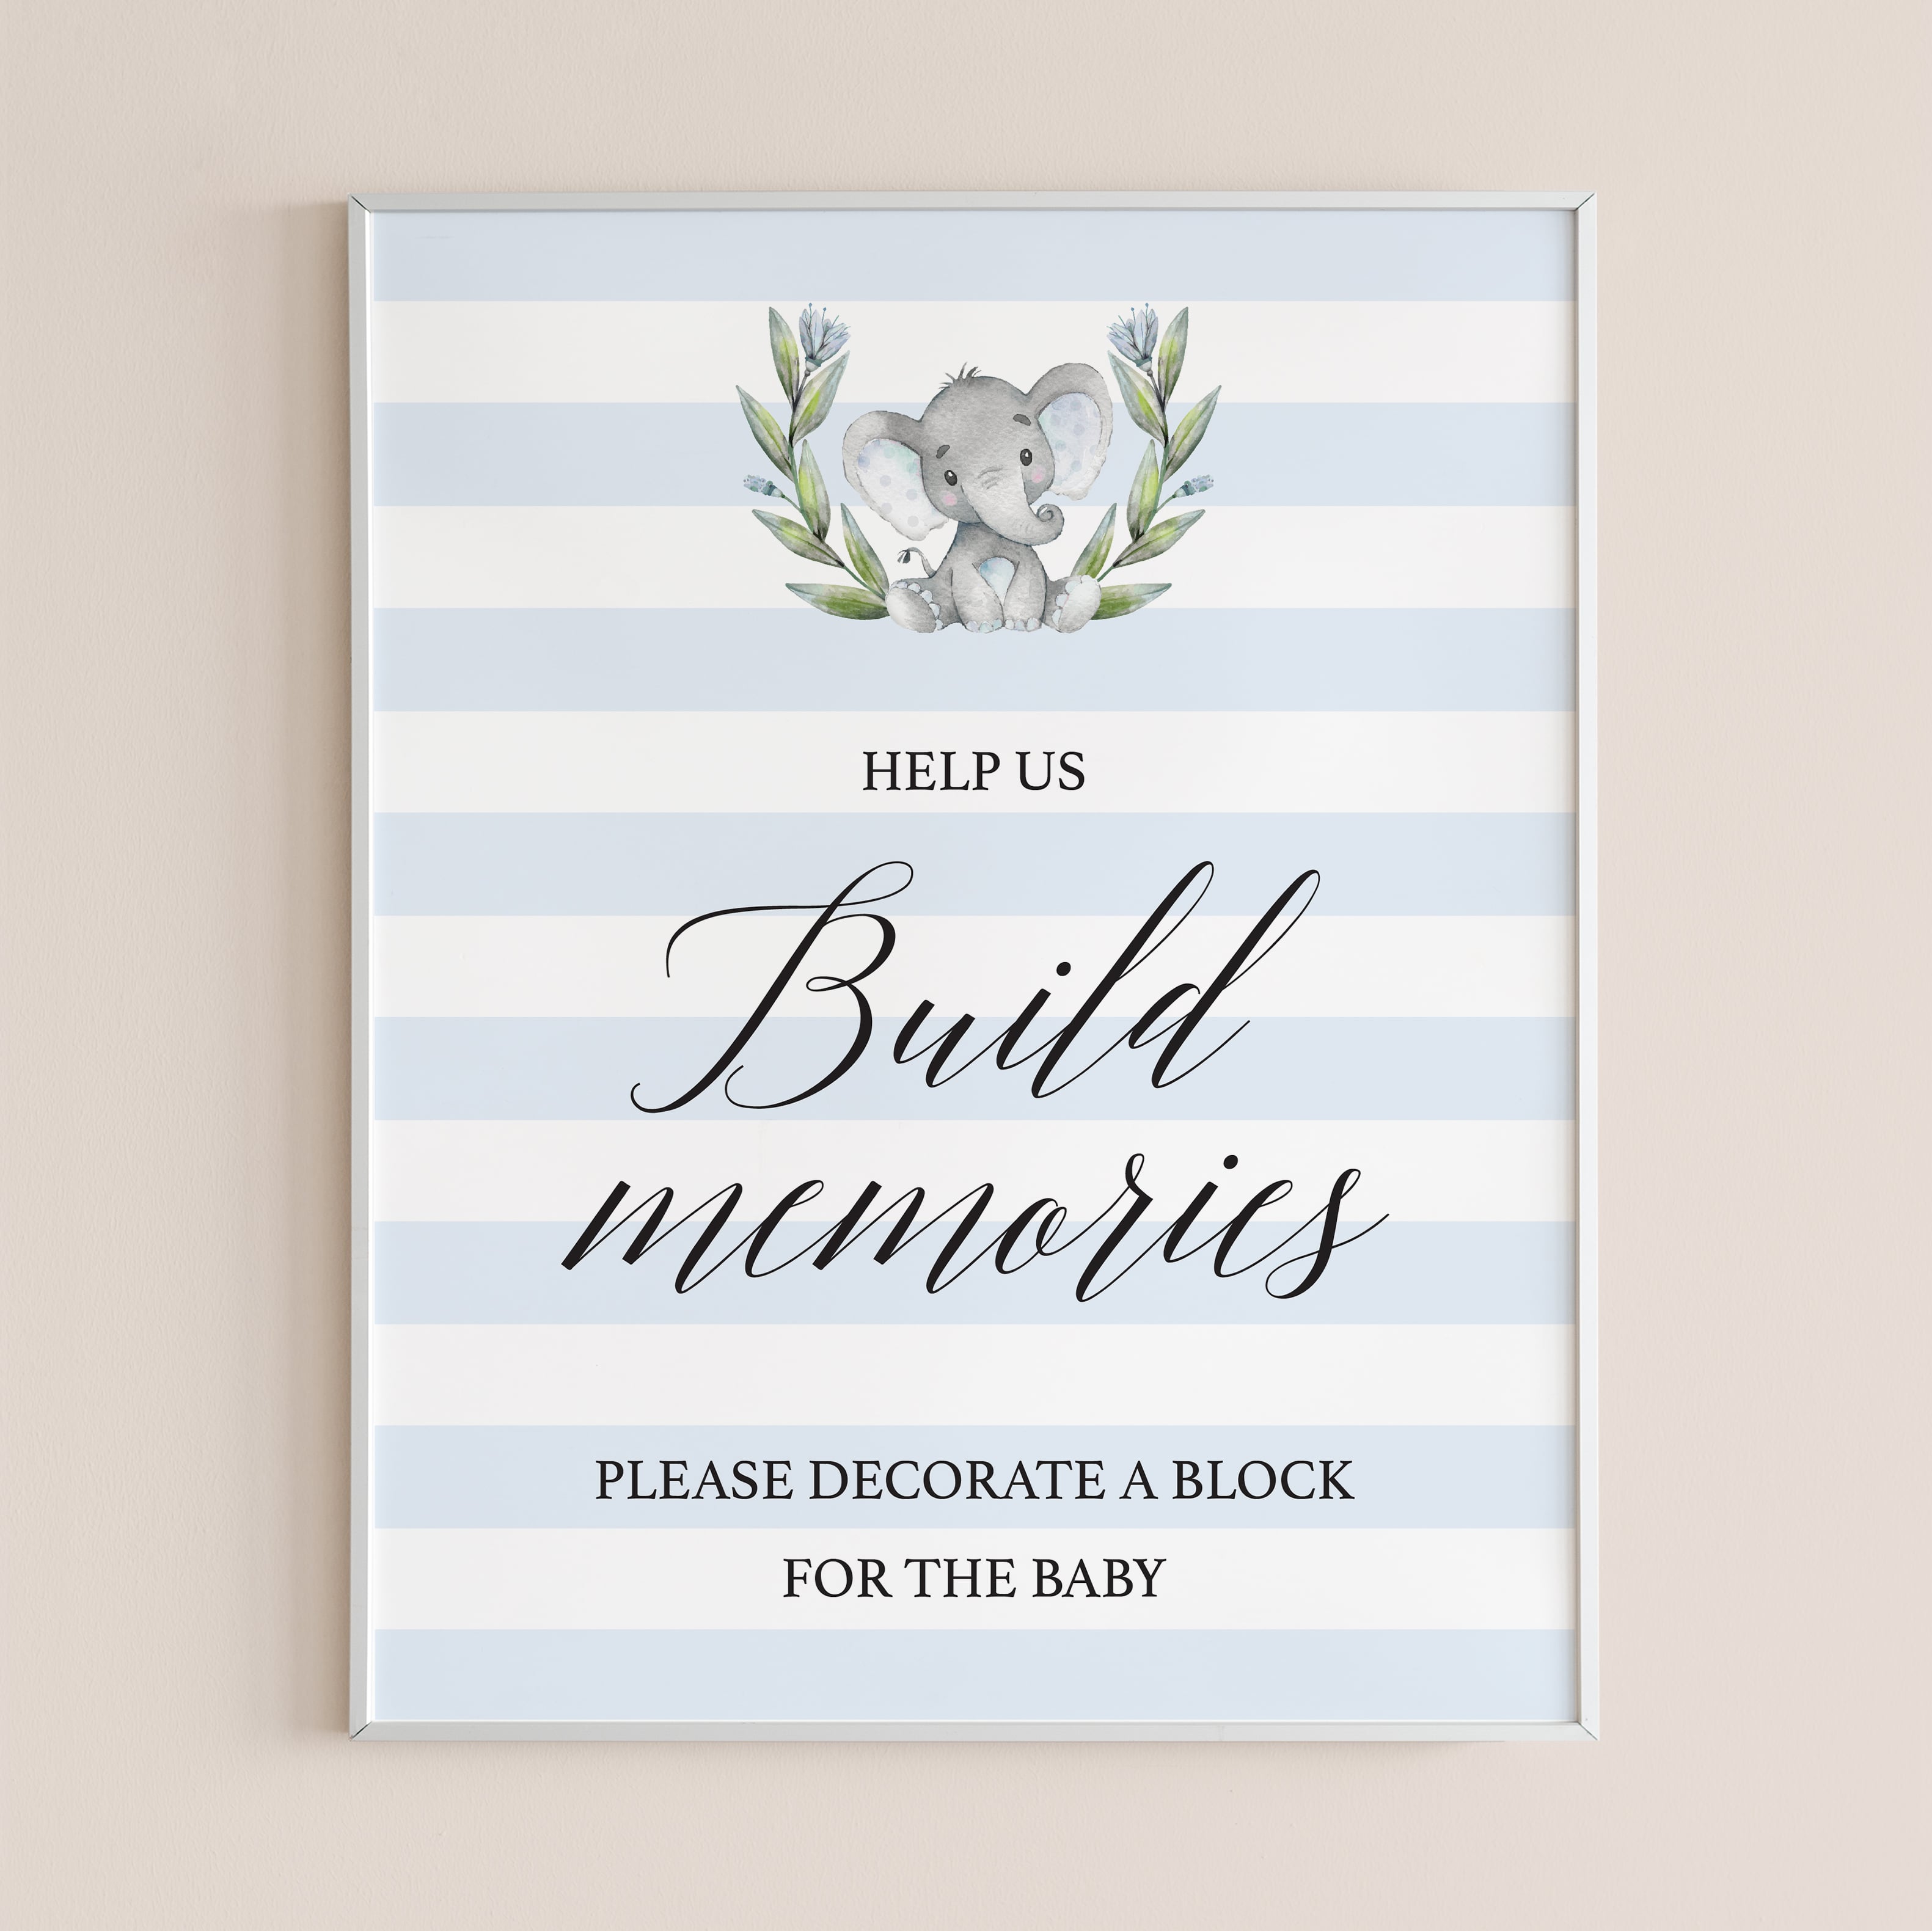 Decorate a block for baby sign printable by LittleSizzle